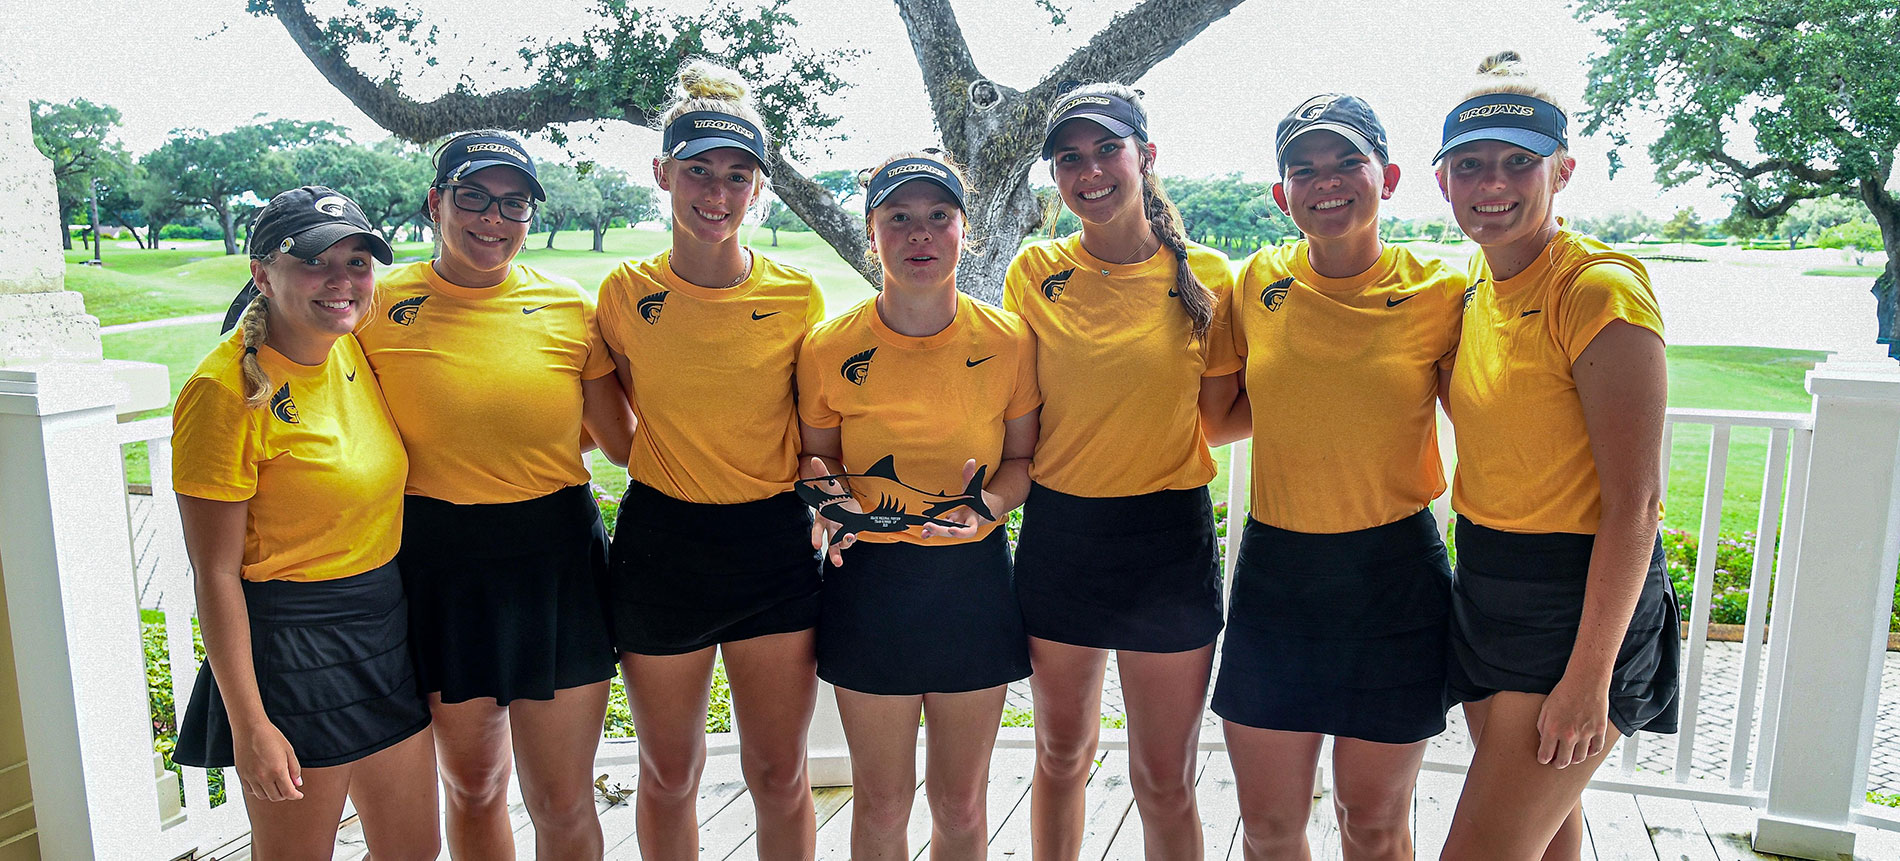 School Records Fall as Women’s Golf Finishes as Runners-Up at South Regional Preview